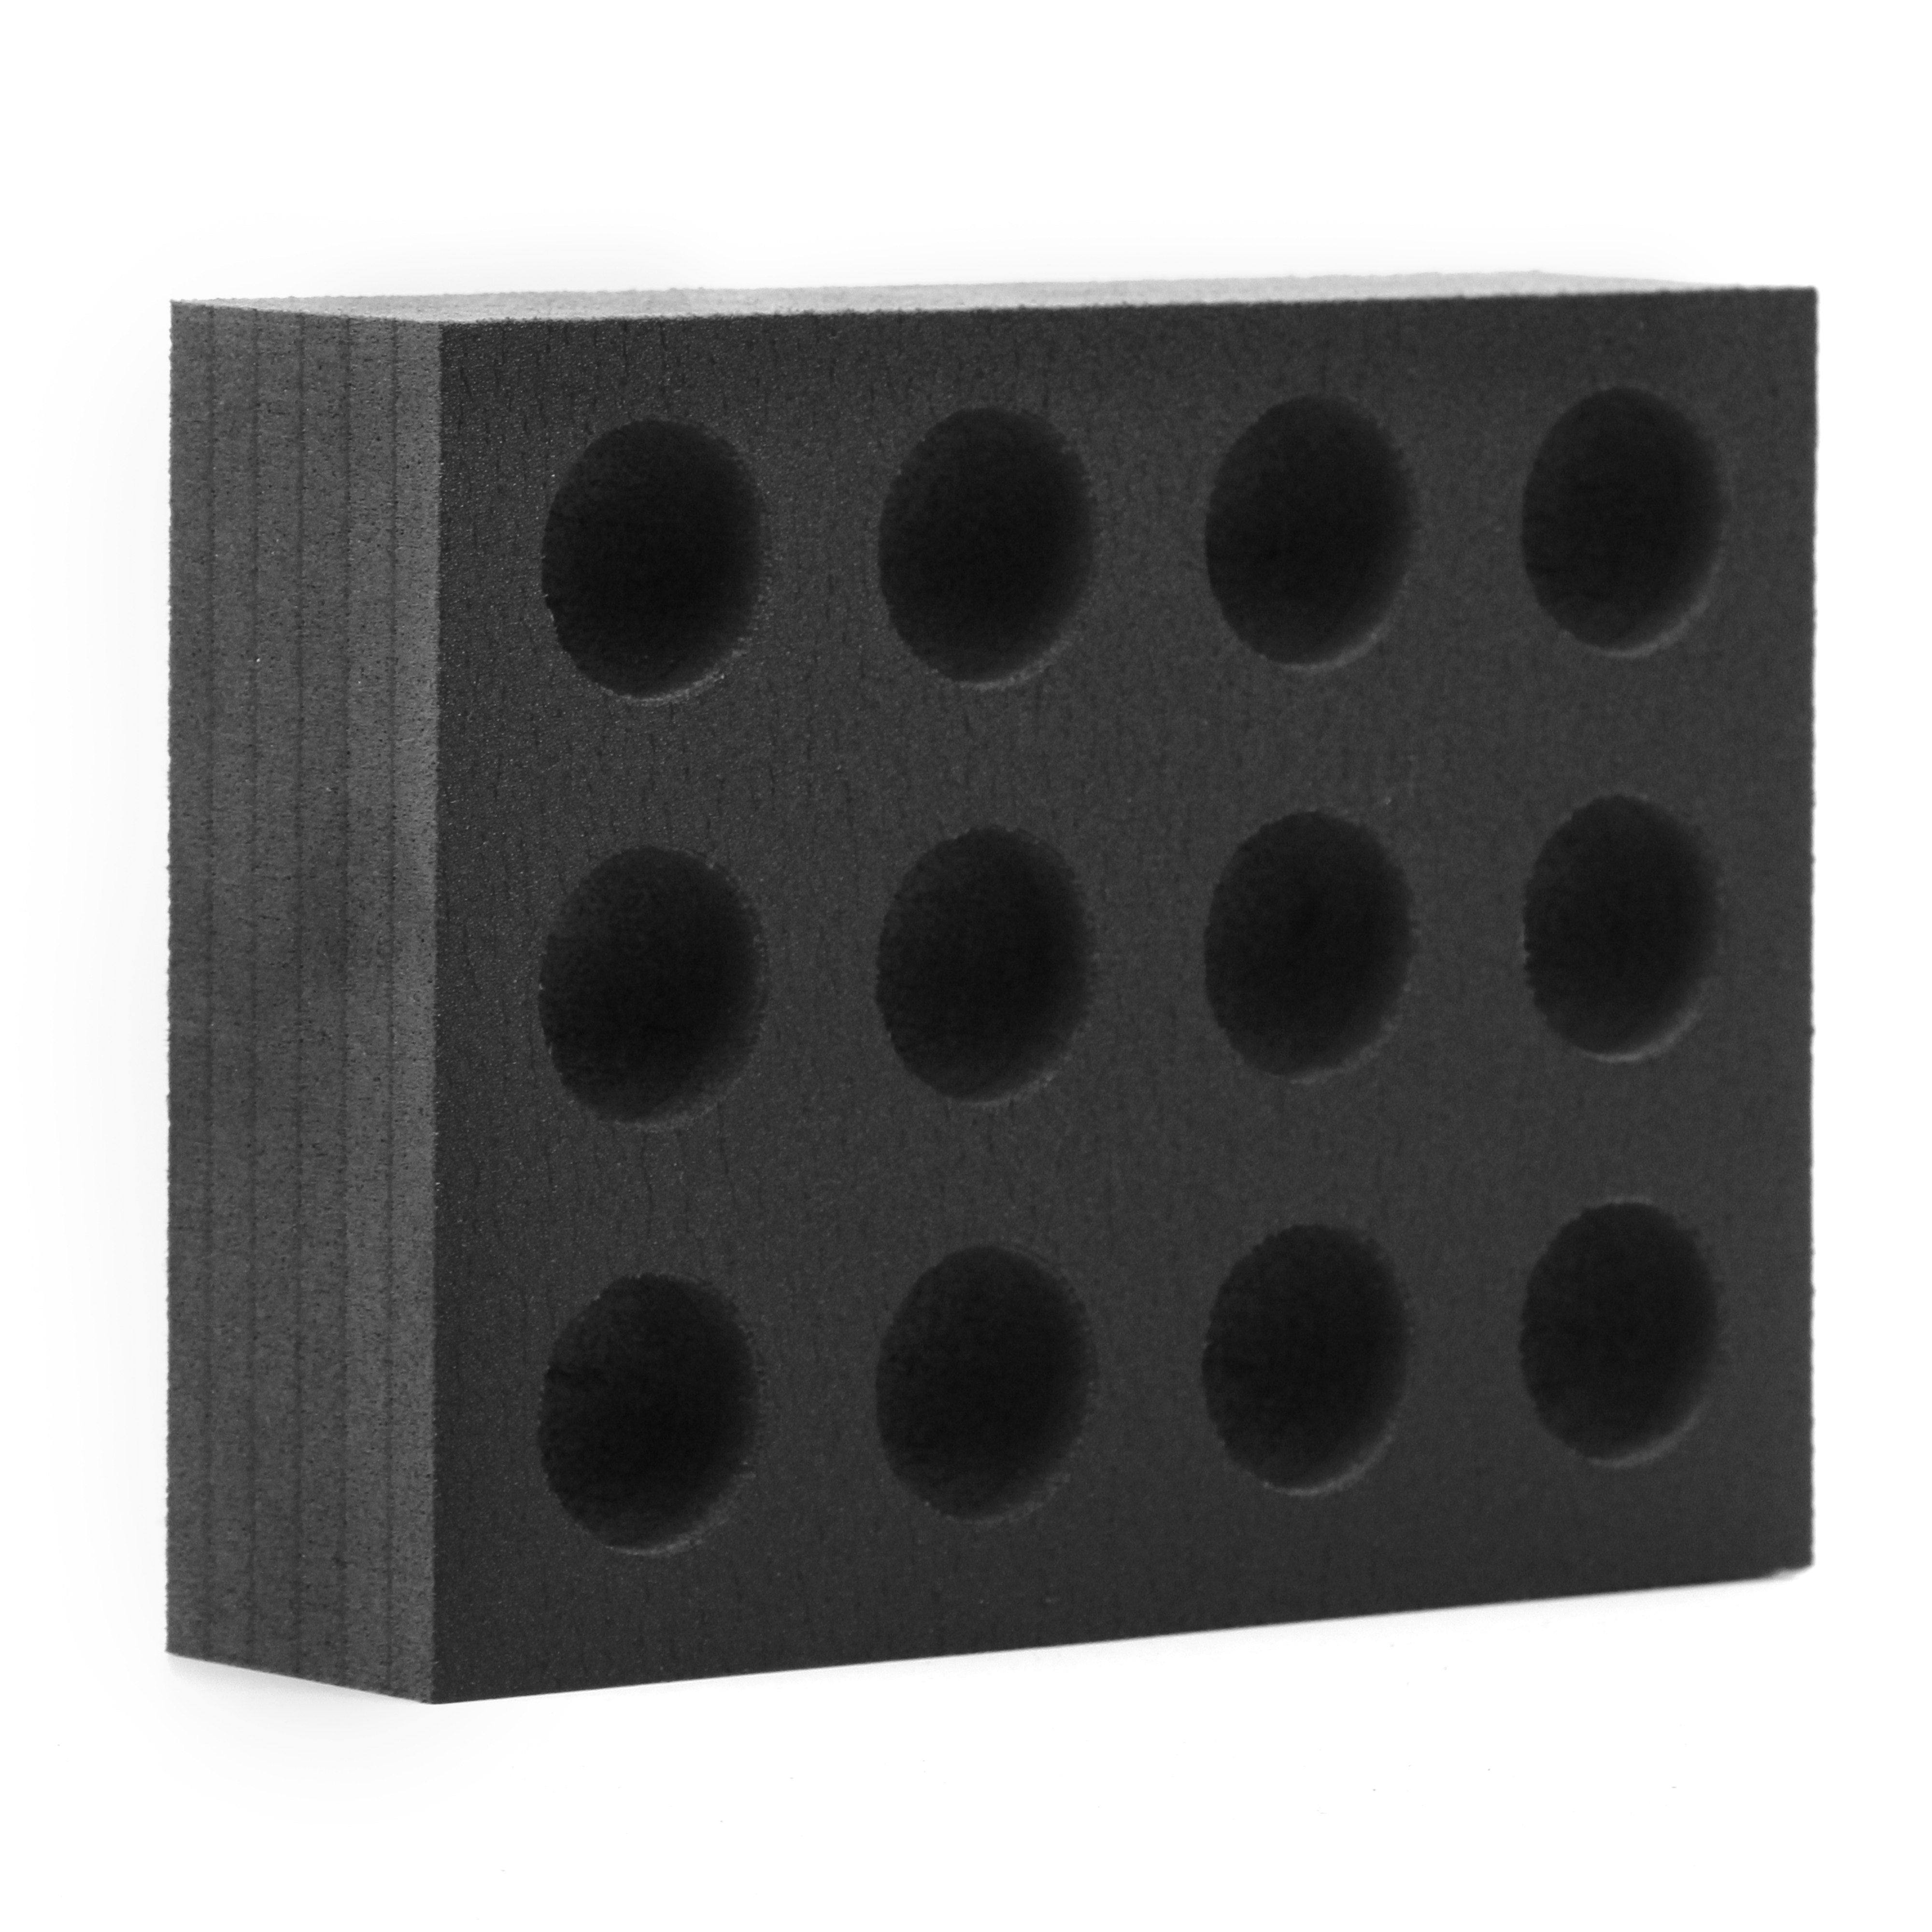 Heavy Duty Foam Dunnage Circular Holes Reusable Transport Storage Organization Shipping Boxes Crates Containers Warehouses Waterproof 24x12x2 Inches